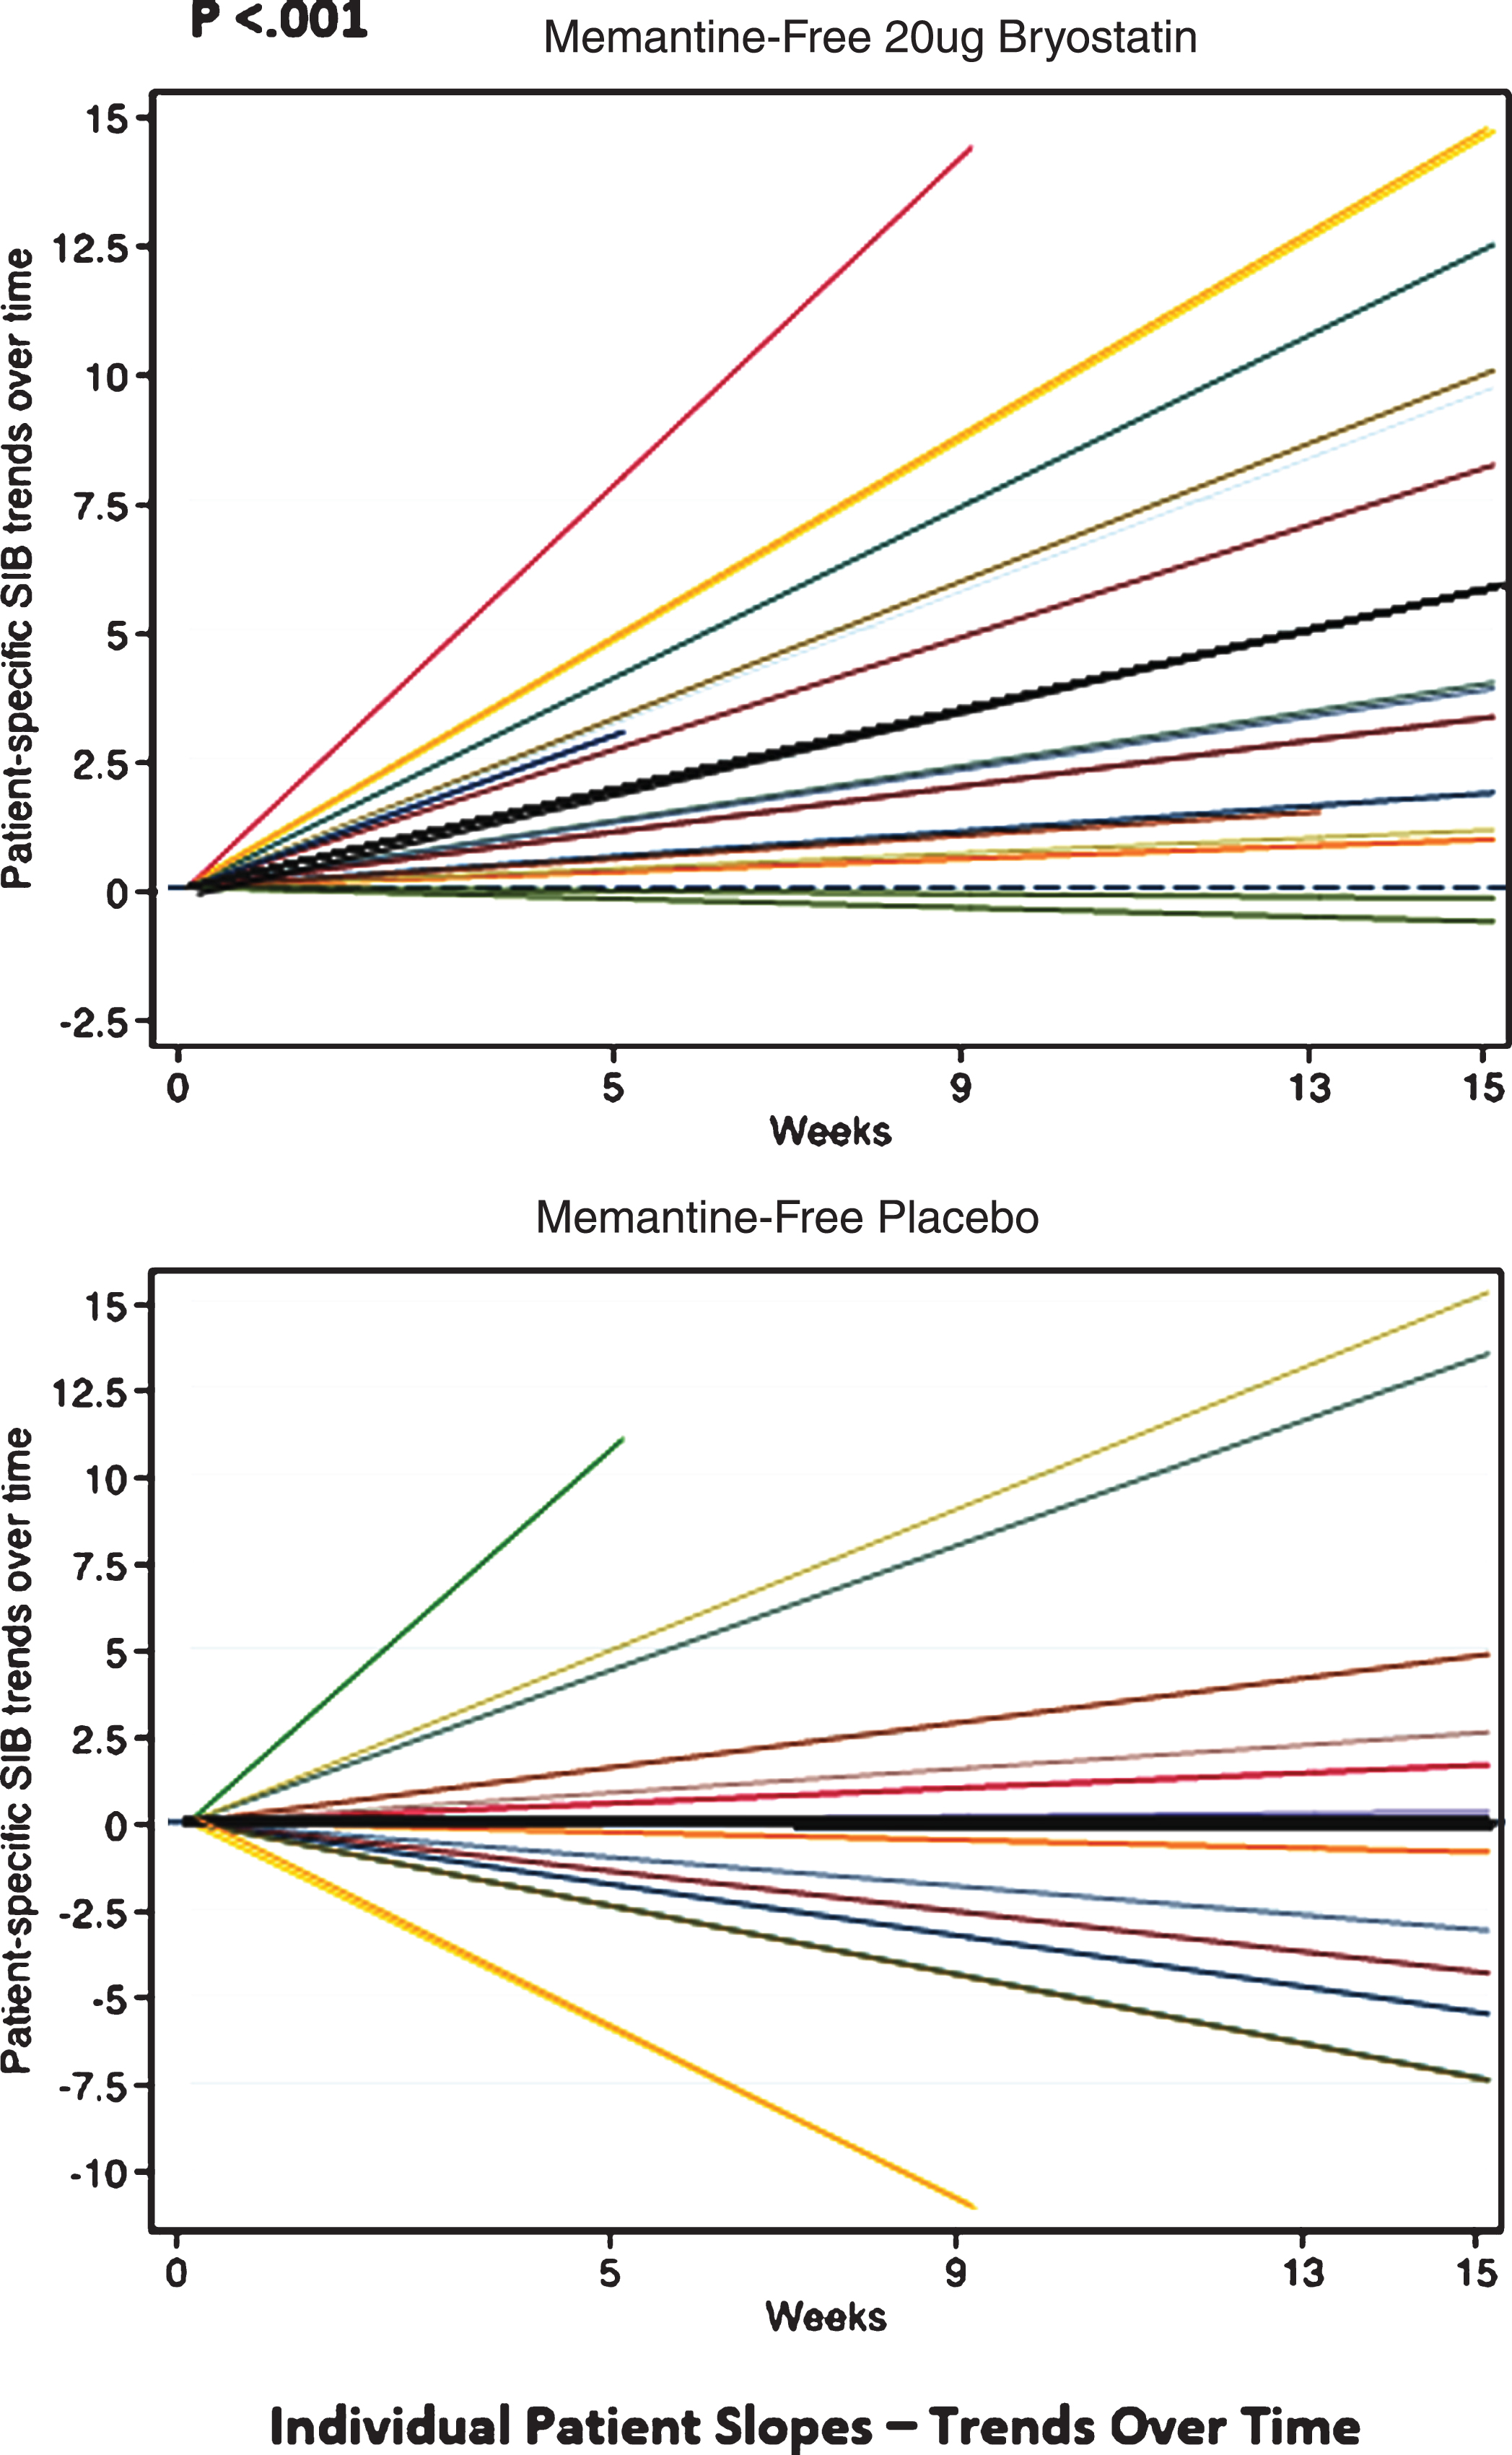 Individual SIB slopes (e.g., trends over time) from baseline (various color lines), and overall treatment SIB slopes (darker black lines) for memantine-free 20 μg bryostatin arm, (Top); and memantine-free, placebo arm, (Bottom), respectively. Based on the statistical analysis, only the 20 μg bryostatin, memantine-free group, overall treatment (dark black line, Top) shows a significant (p < 0.001) positive SIB trend (SIB improvement with repeated doses over time) suggesting a treatment effect of bryostatin for this group only. With memantine present, neither the 20 μg bryostatin arm nor the placebo arm showed a significant positive SIB trend.